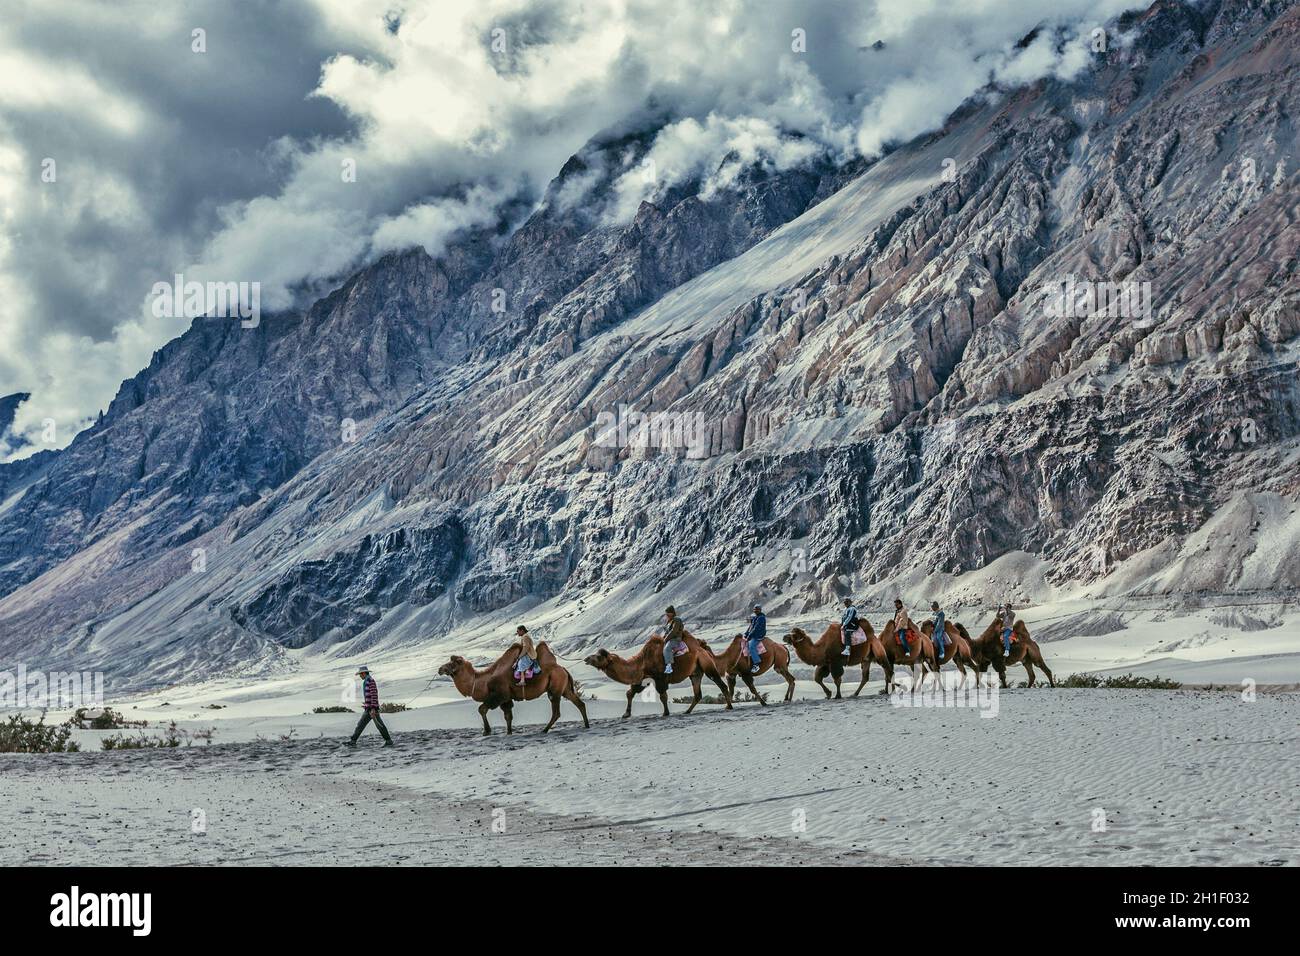 HUNDER, INDIA - SEPTEMBER 11, 2012: Tourists riding camels in Nubra valley in Himalayas, Ladakh Stock Photo